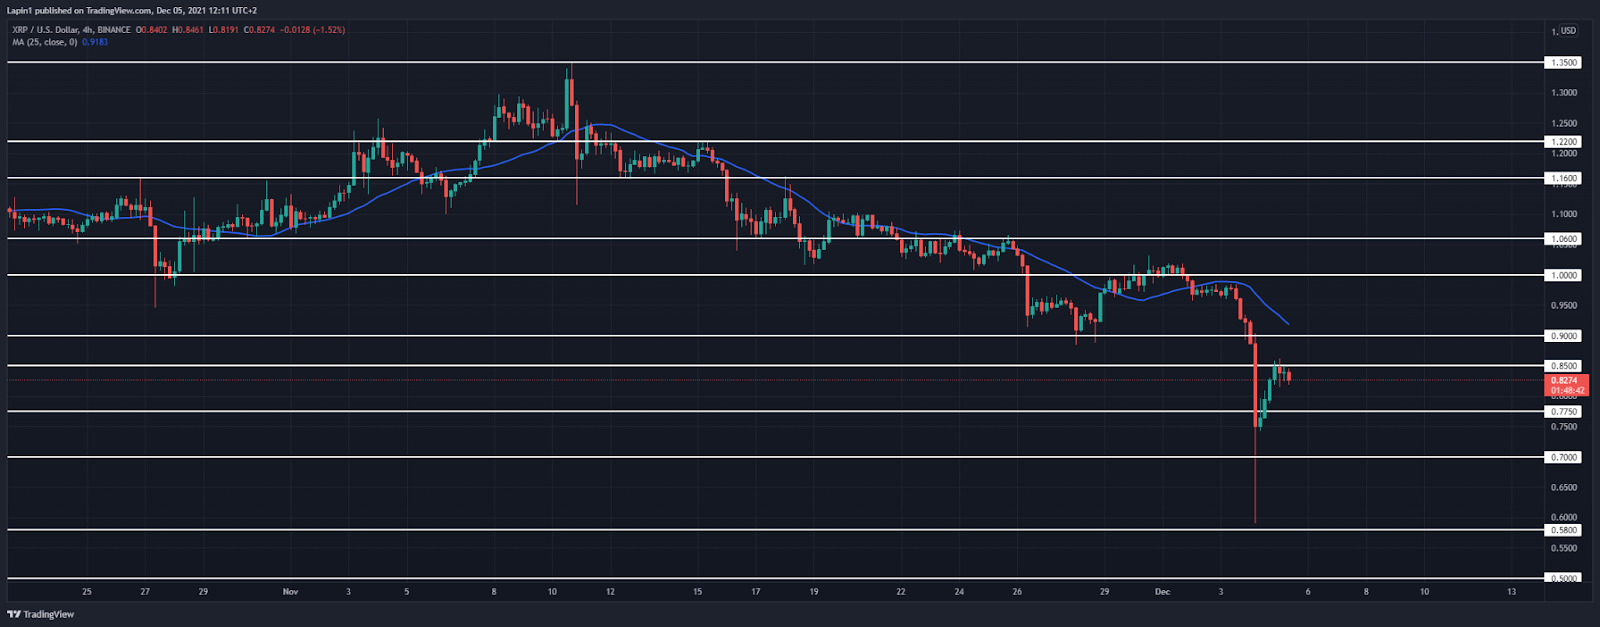 Ripple Price Analysis: XRP finds resistance at $0.85, a test of downside to follow?